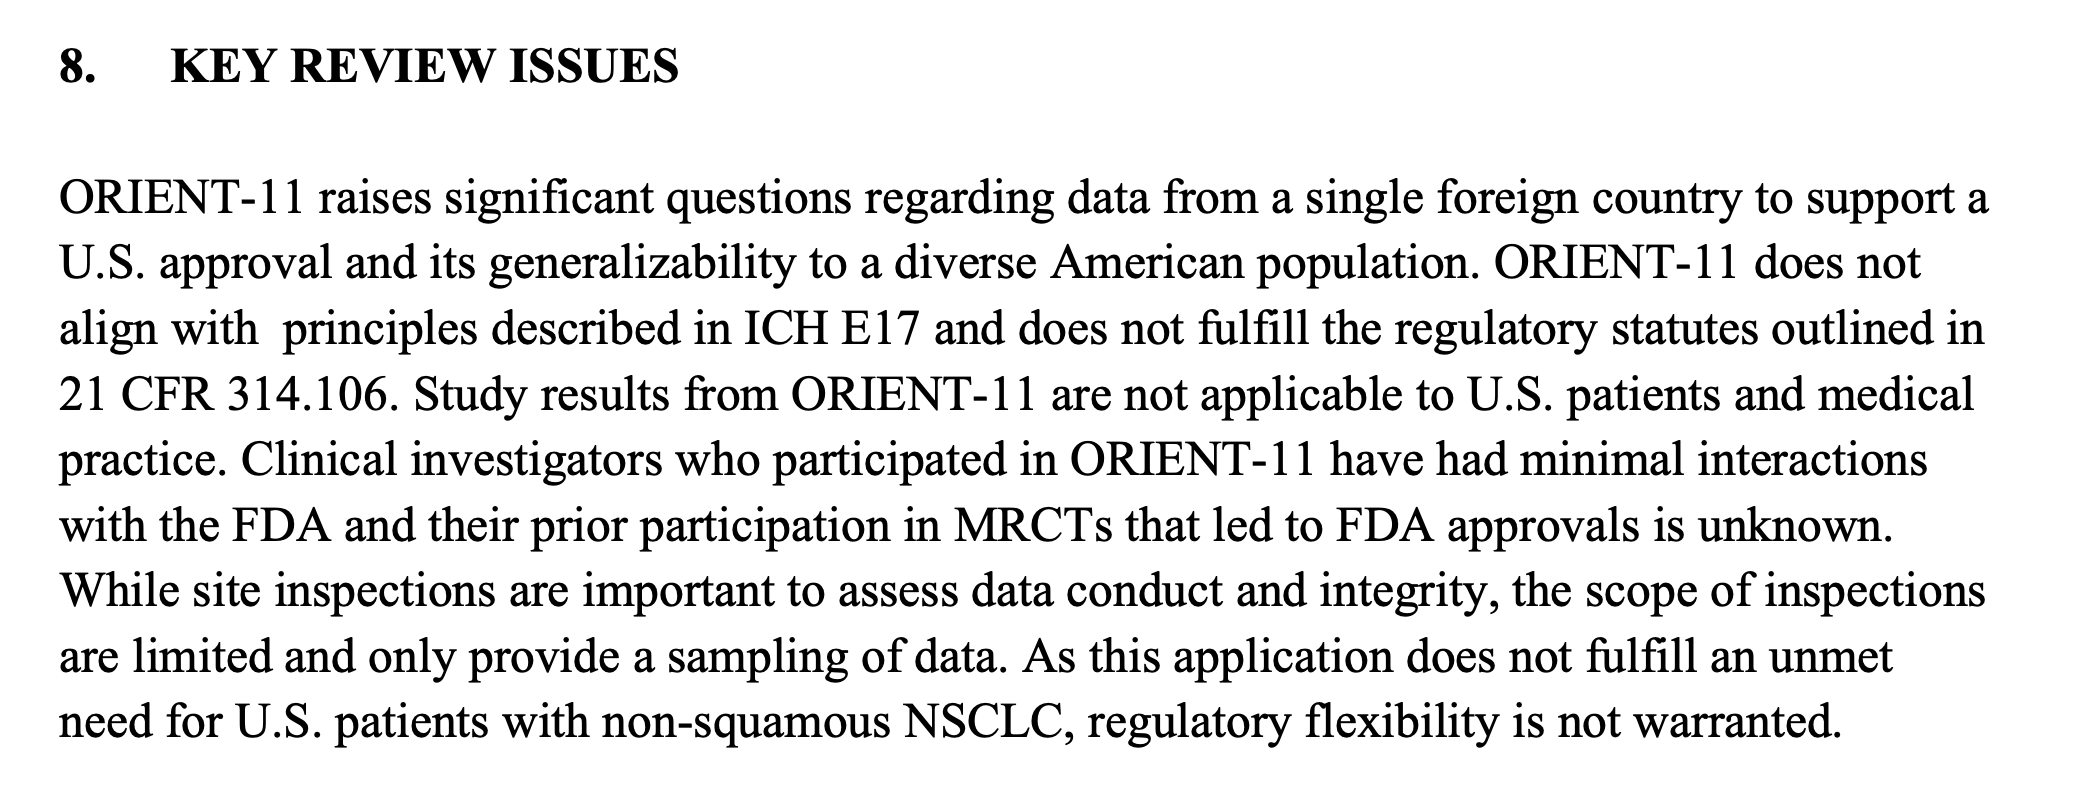 FDA Panels on Twitter: "Key excerpts of #FDA's briefing document for  #sintilimab suggest broader regulatory applicability. FDA briefing document  https://t.co/3dabfjaP1O Draft voting question https://t.co/6qW8xpiP3U All  materials, including link to ...